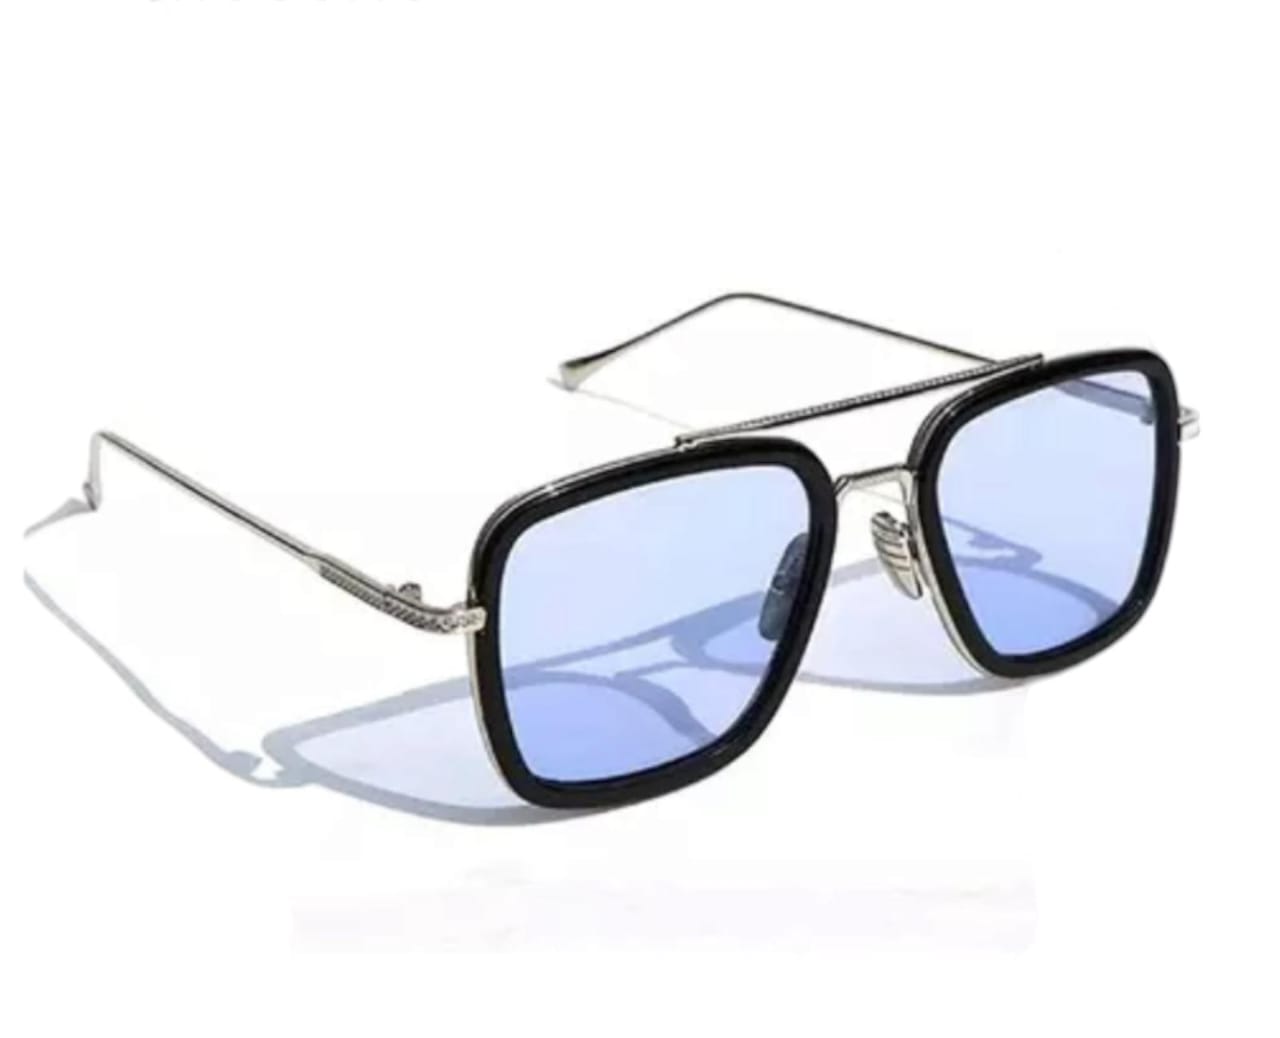 Glorious Eyewear Blueray Block Uv Protected Computer Glasses In Silver Aviator Frame for Men and Women 